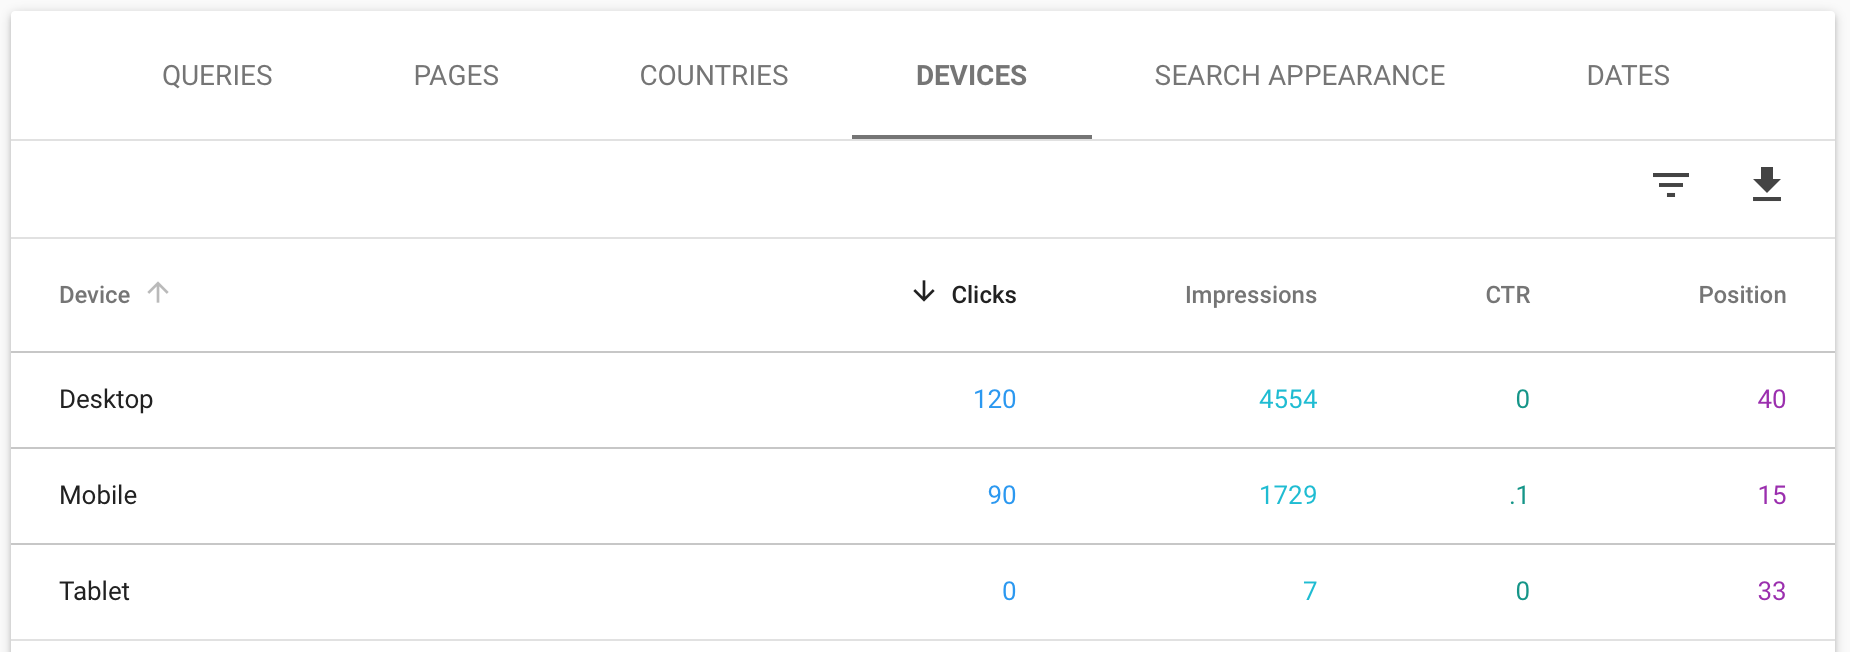 Search Console Devices Report